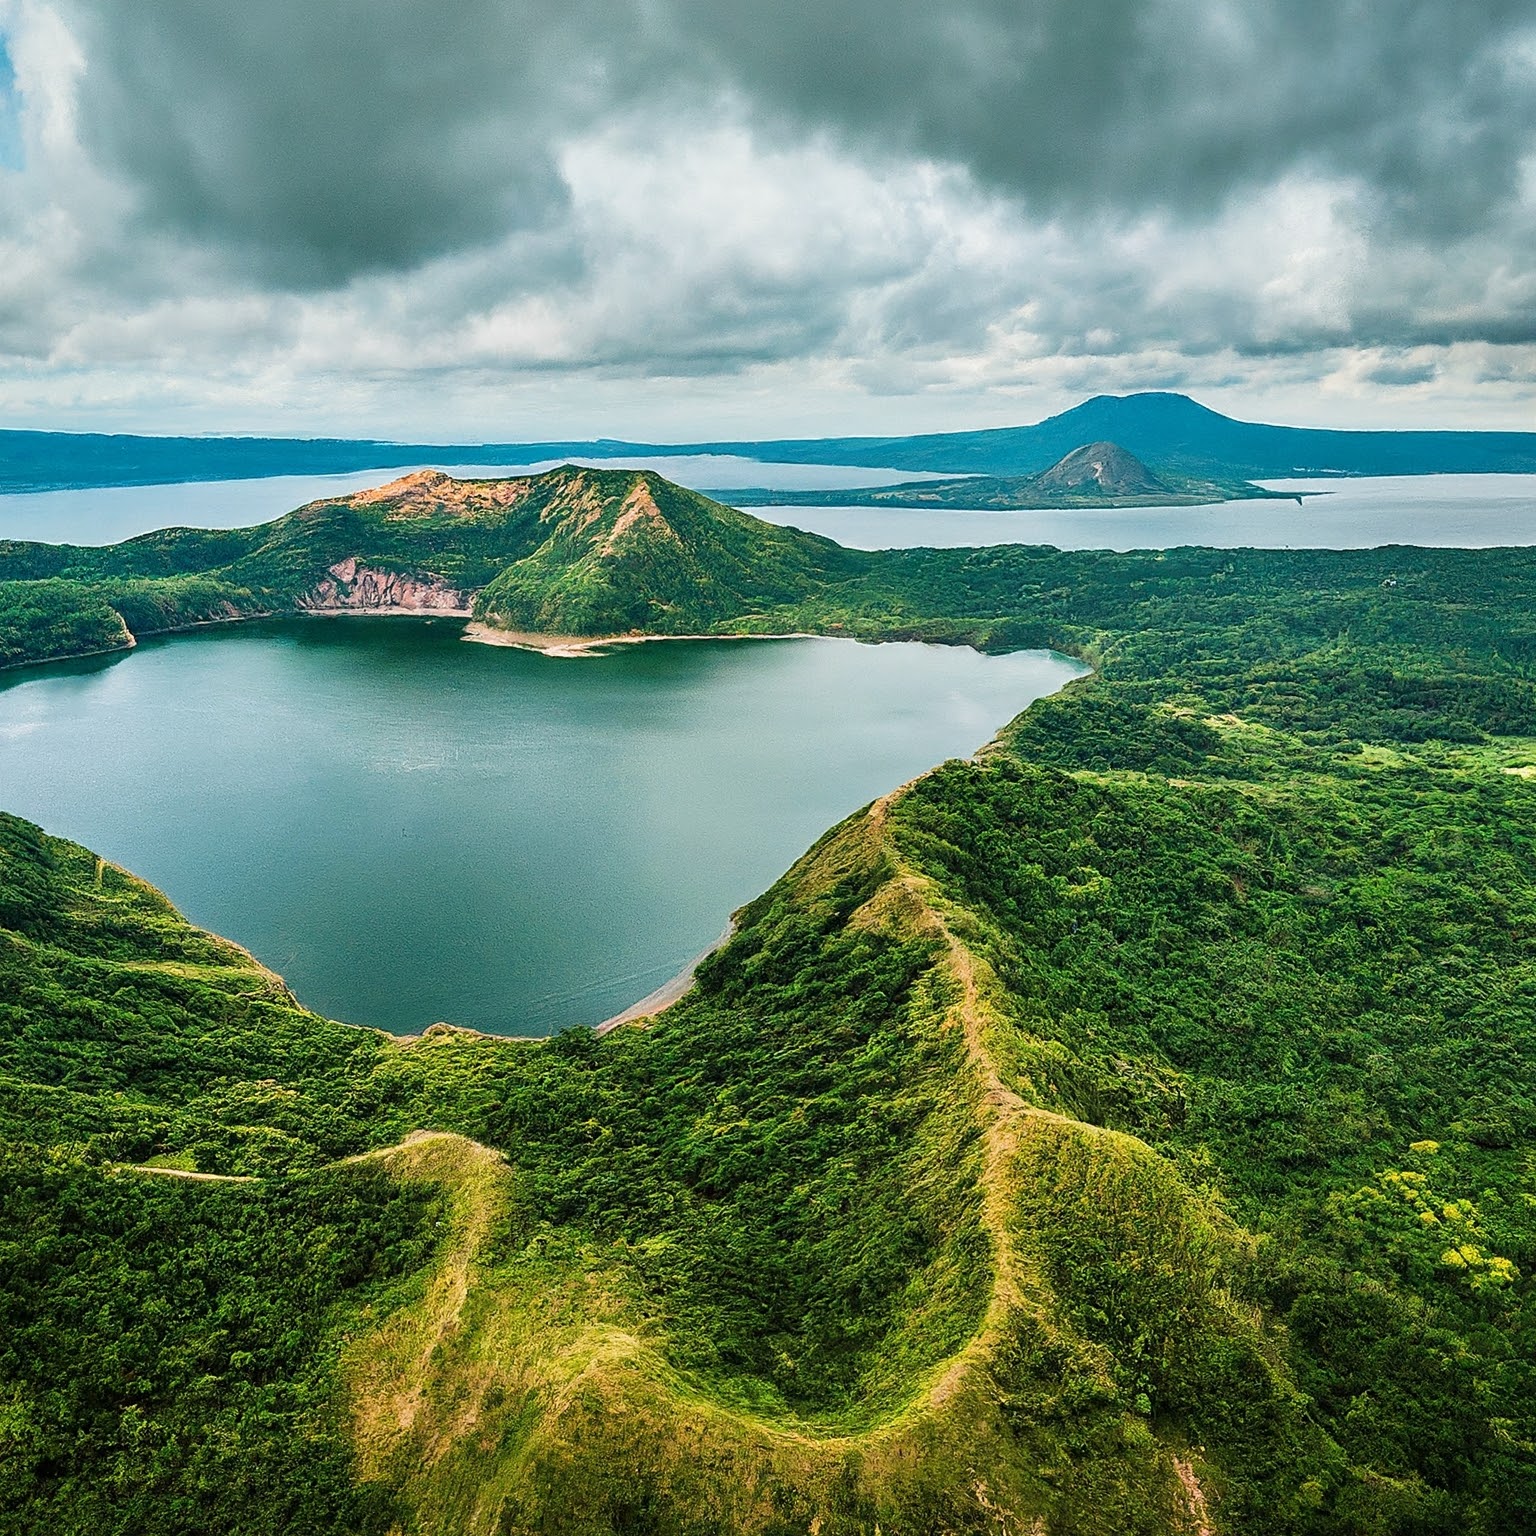 Panoramic view of Taal Lake in Tagaytay, Philippines, with Taal Volcano.